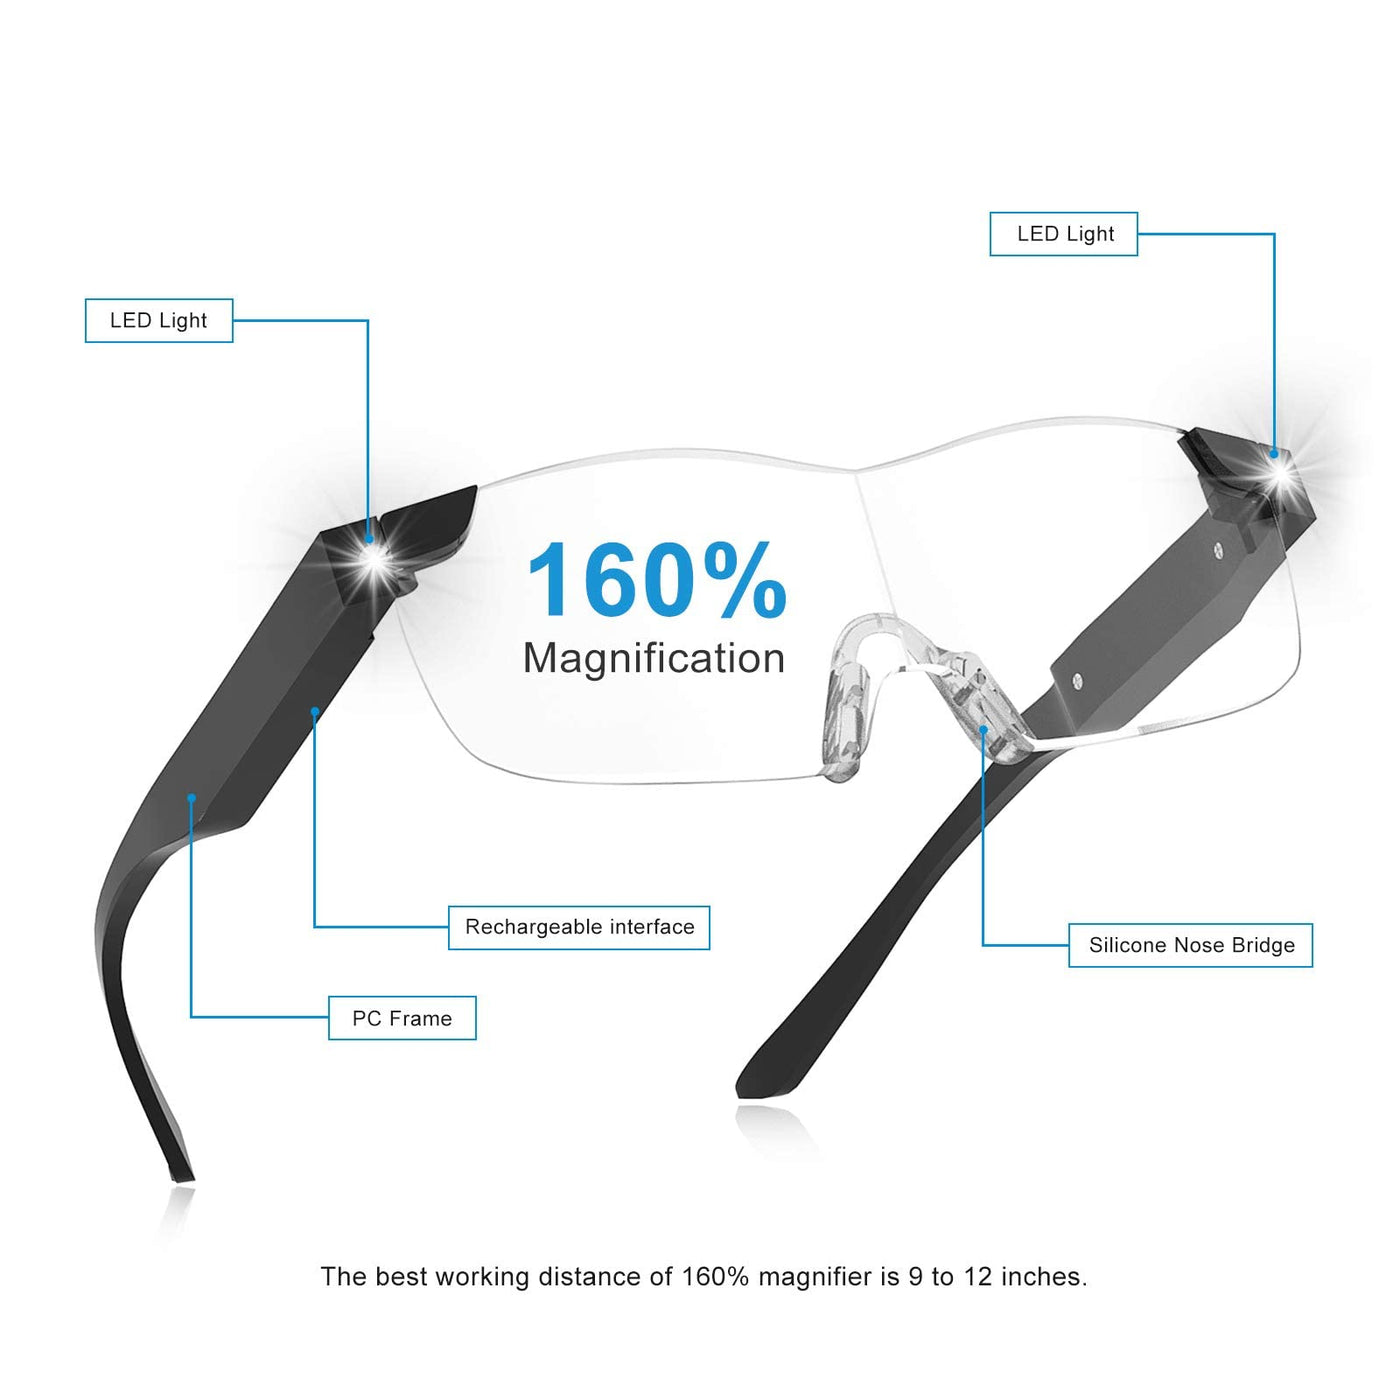 160% Magnifying Glasses with Light. Rechargeable LED Lighted Magnification  Eyeglasses. Anti Blue Light. Mighty Bright Sight Hands Free Magnifier for